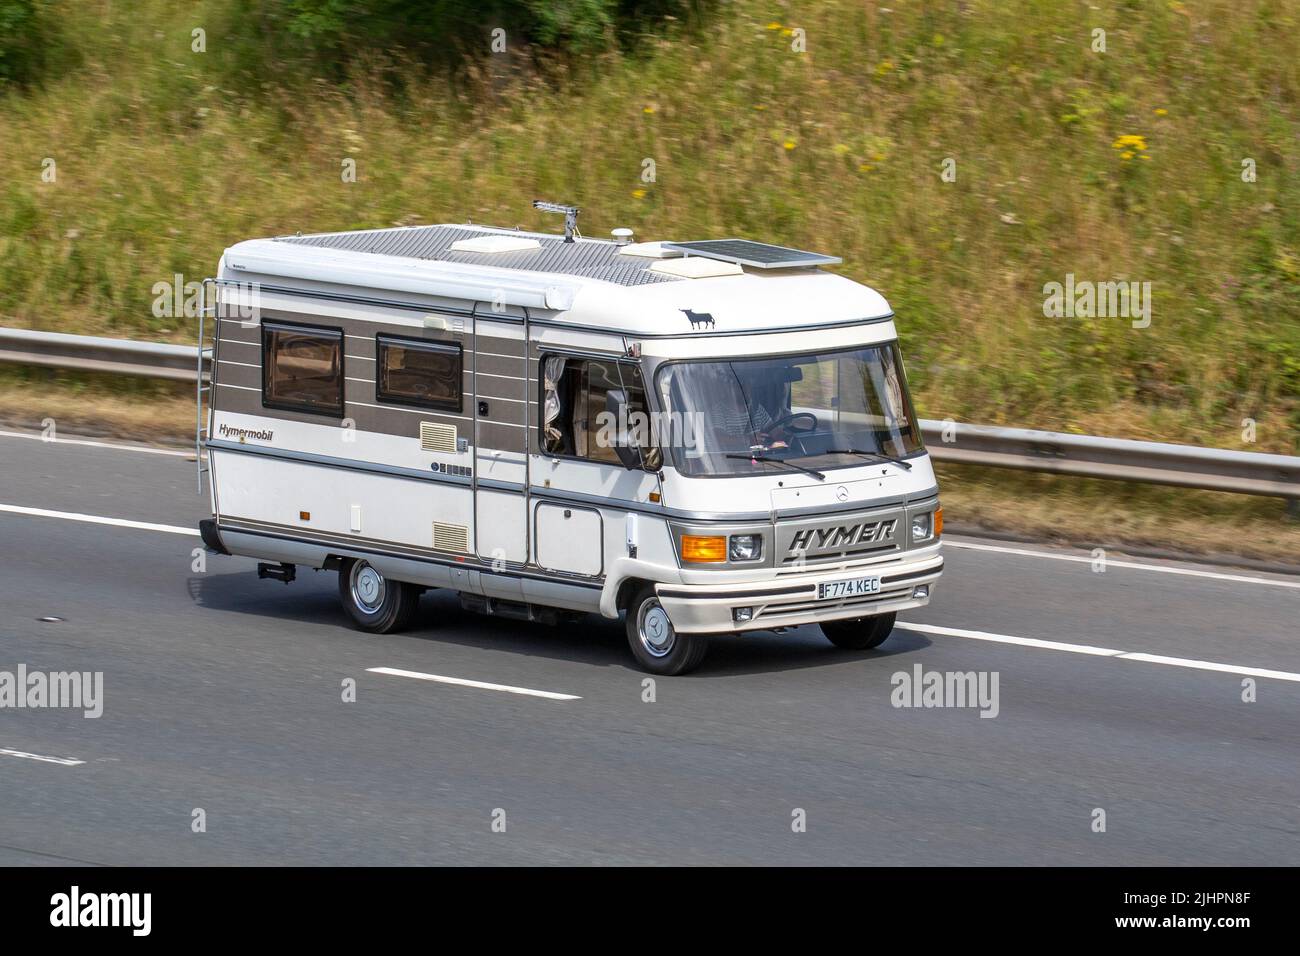 1989 80s eighties Mercedes Benz 308 D 308DF Chasis Cab 2300 cc Hymer Hymermobil motorhome; travelling on the M6 Motorway, Manchester, UK Stock Photo